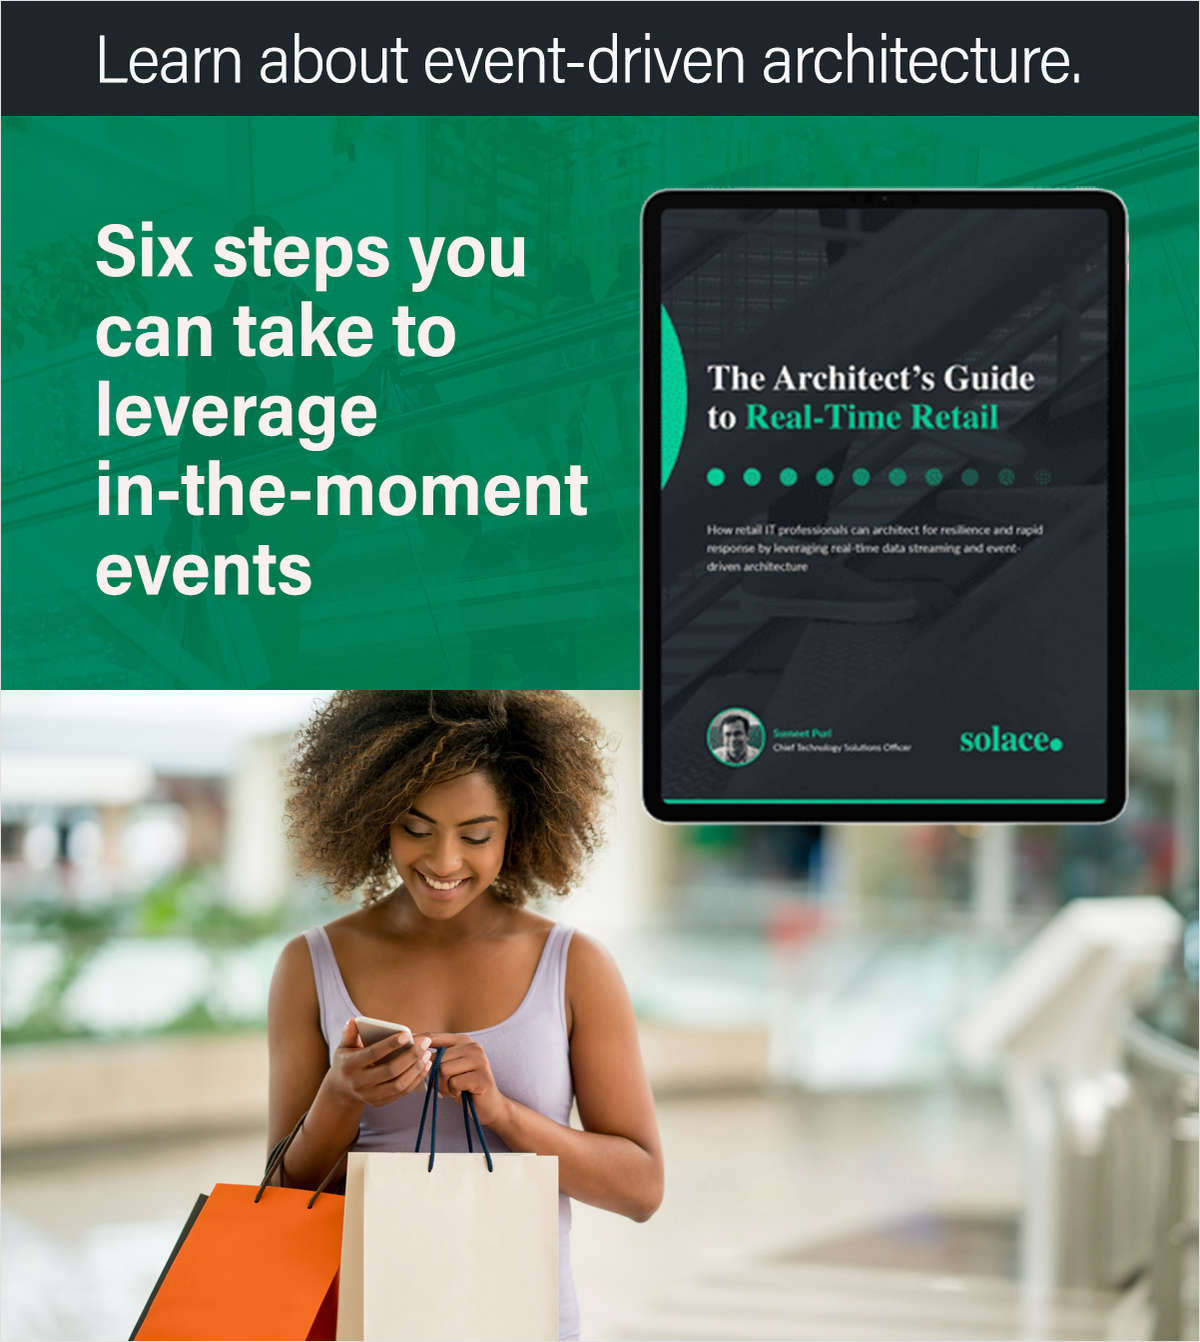 Guide to Real-Time Retail -- Get your copy